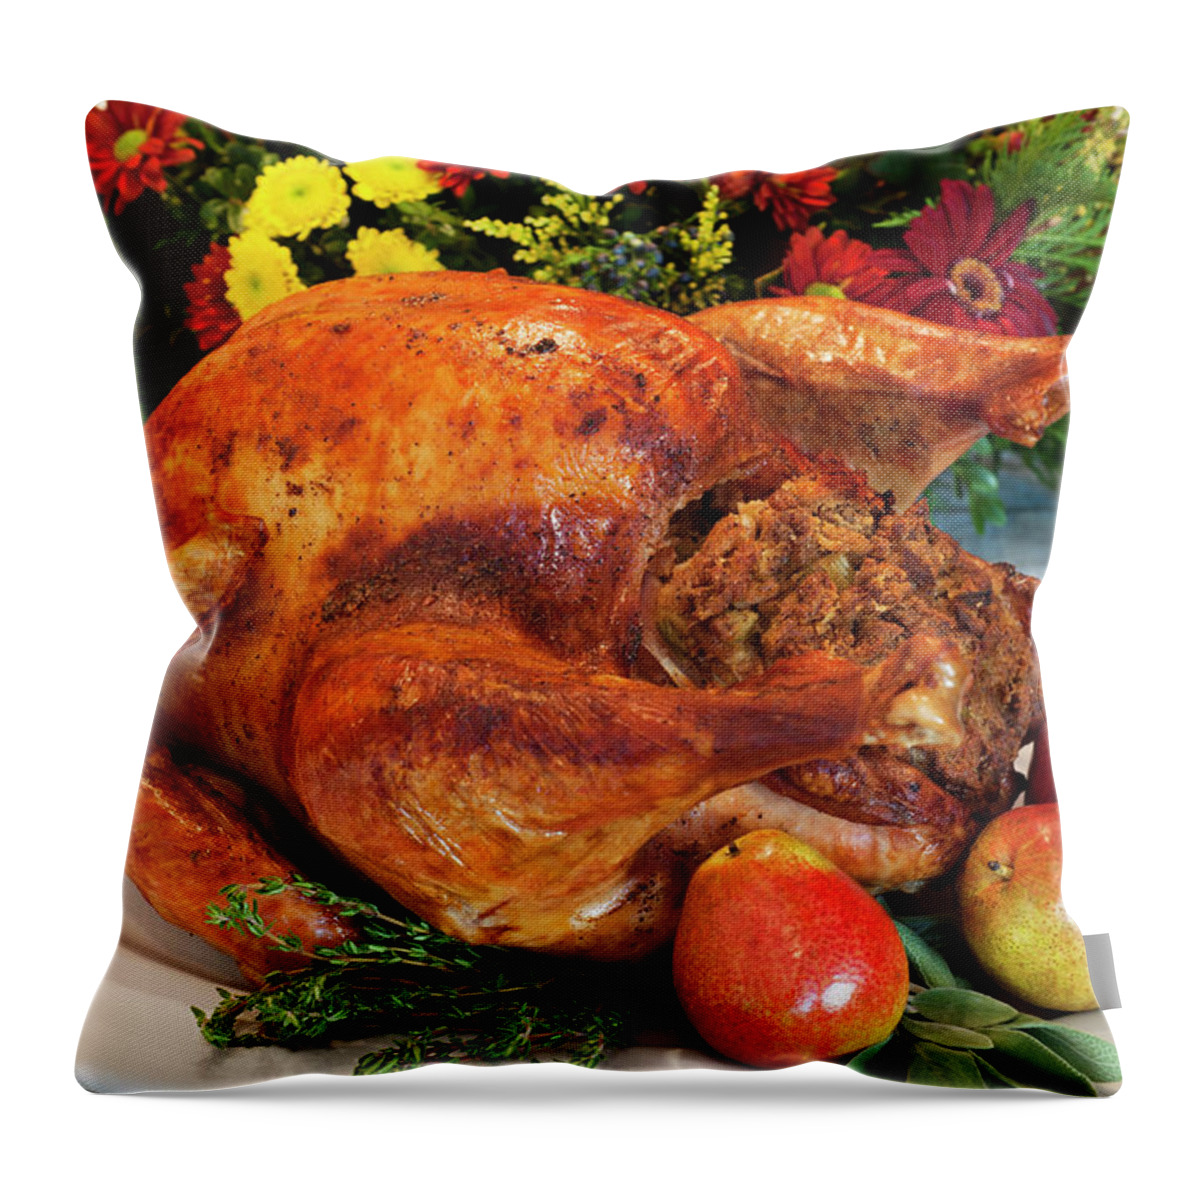 Stuffed Throw Pillow featuring the photograph Roast Turkey by Tetra Images